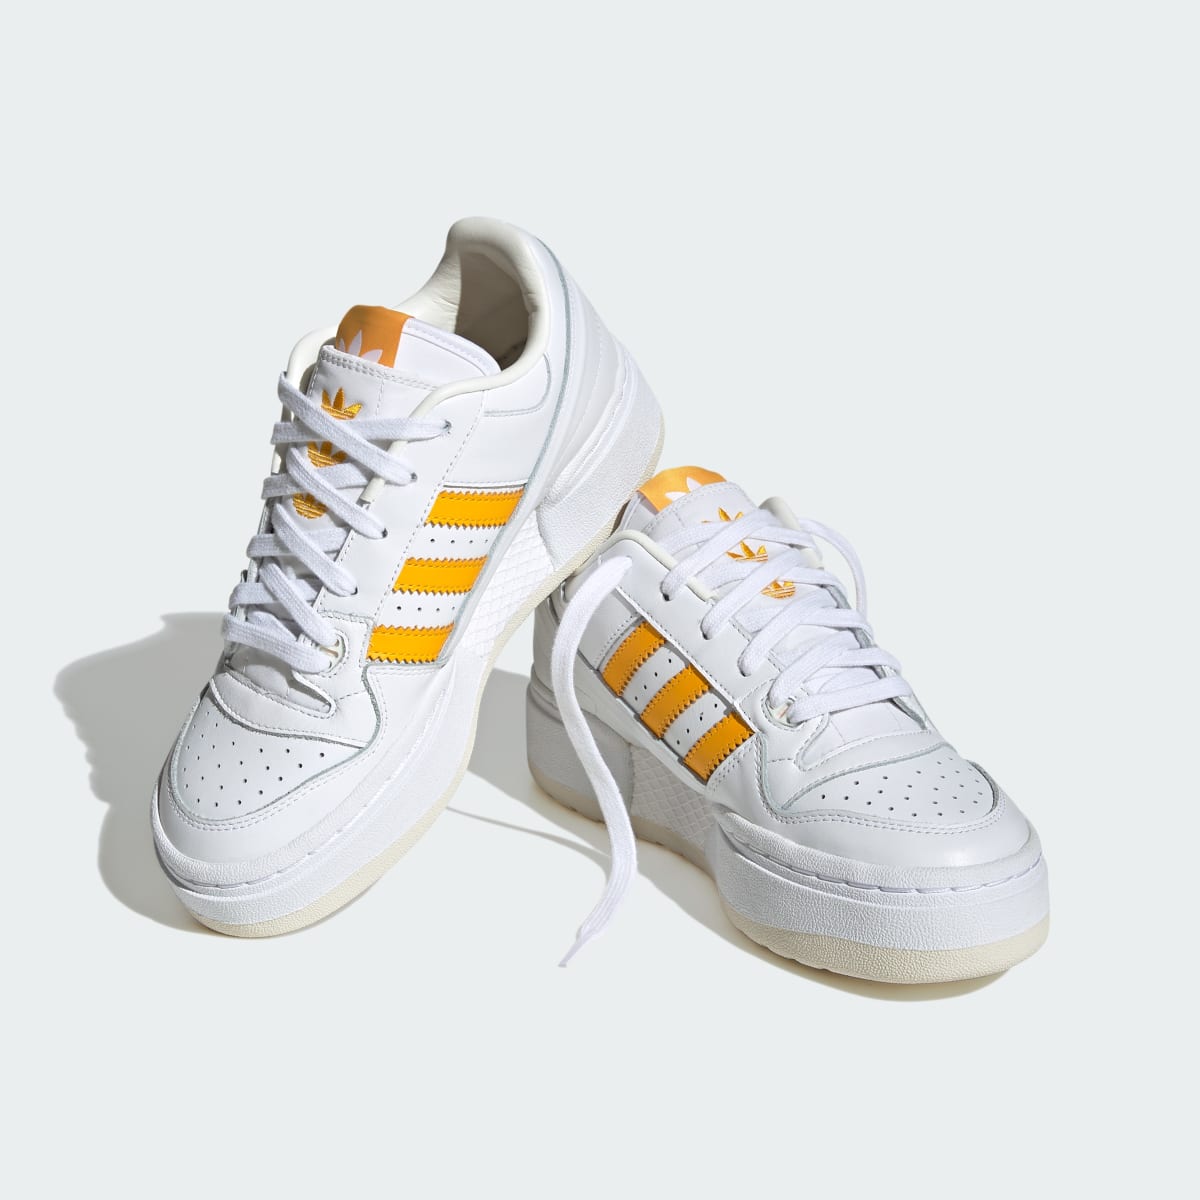 Adidas Forum XLG Shoes. 5